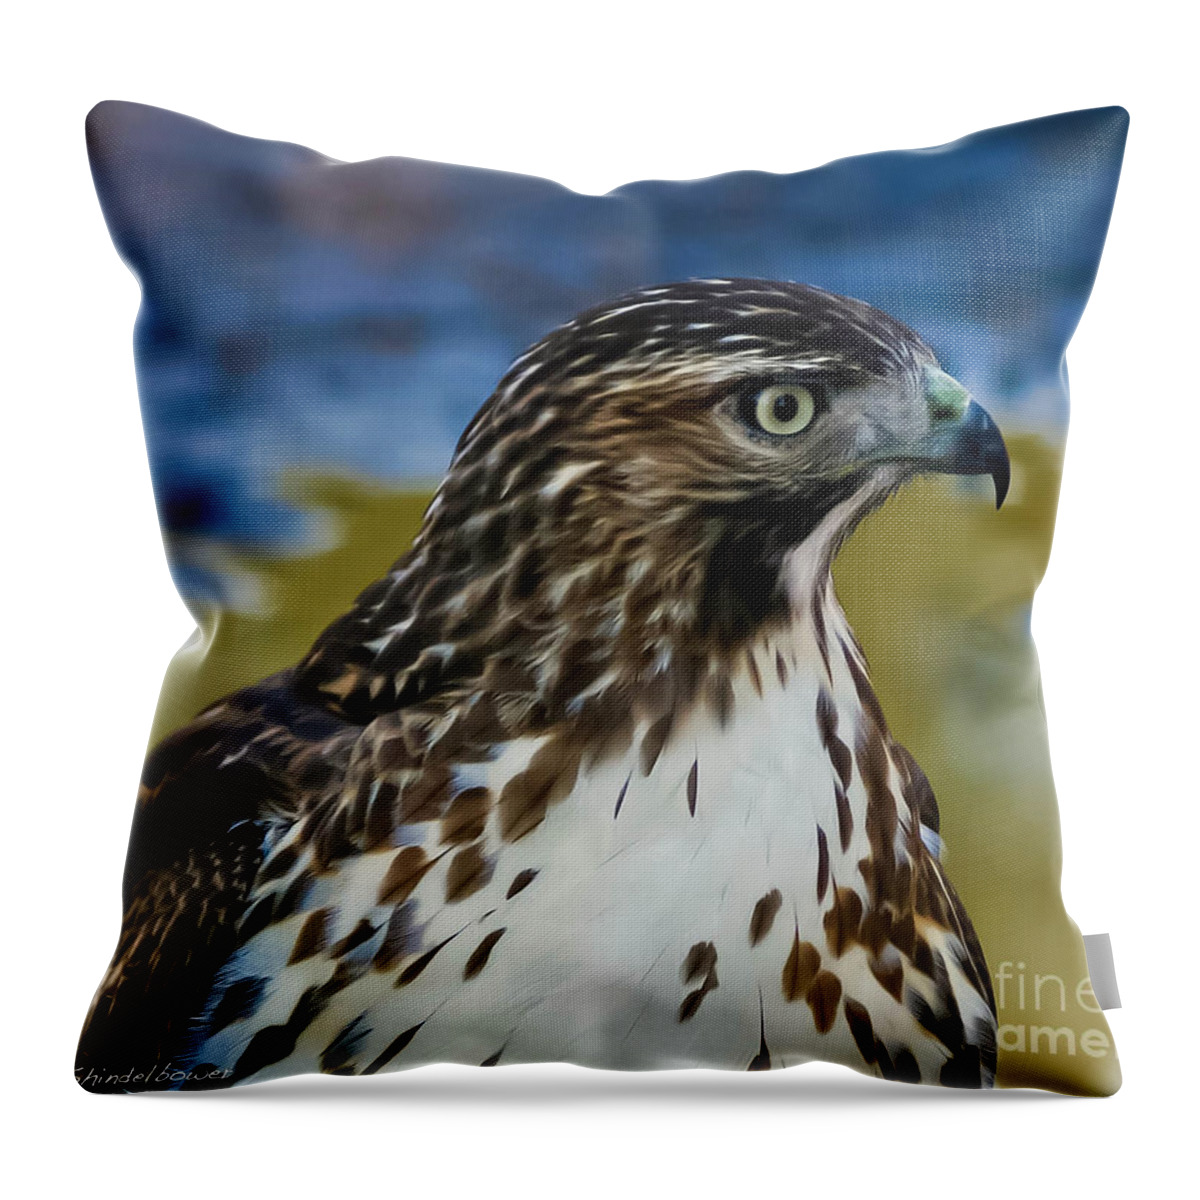 Hawk Throw Pillow featuring the photograph Eye Of The Hawk by Mitch Shindelbower